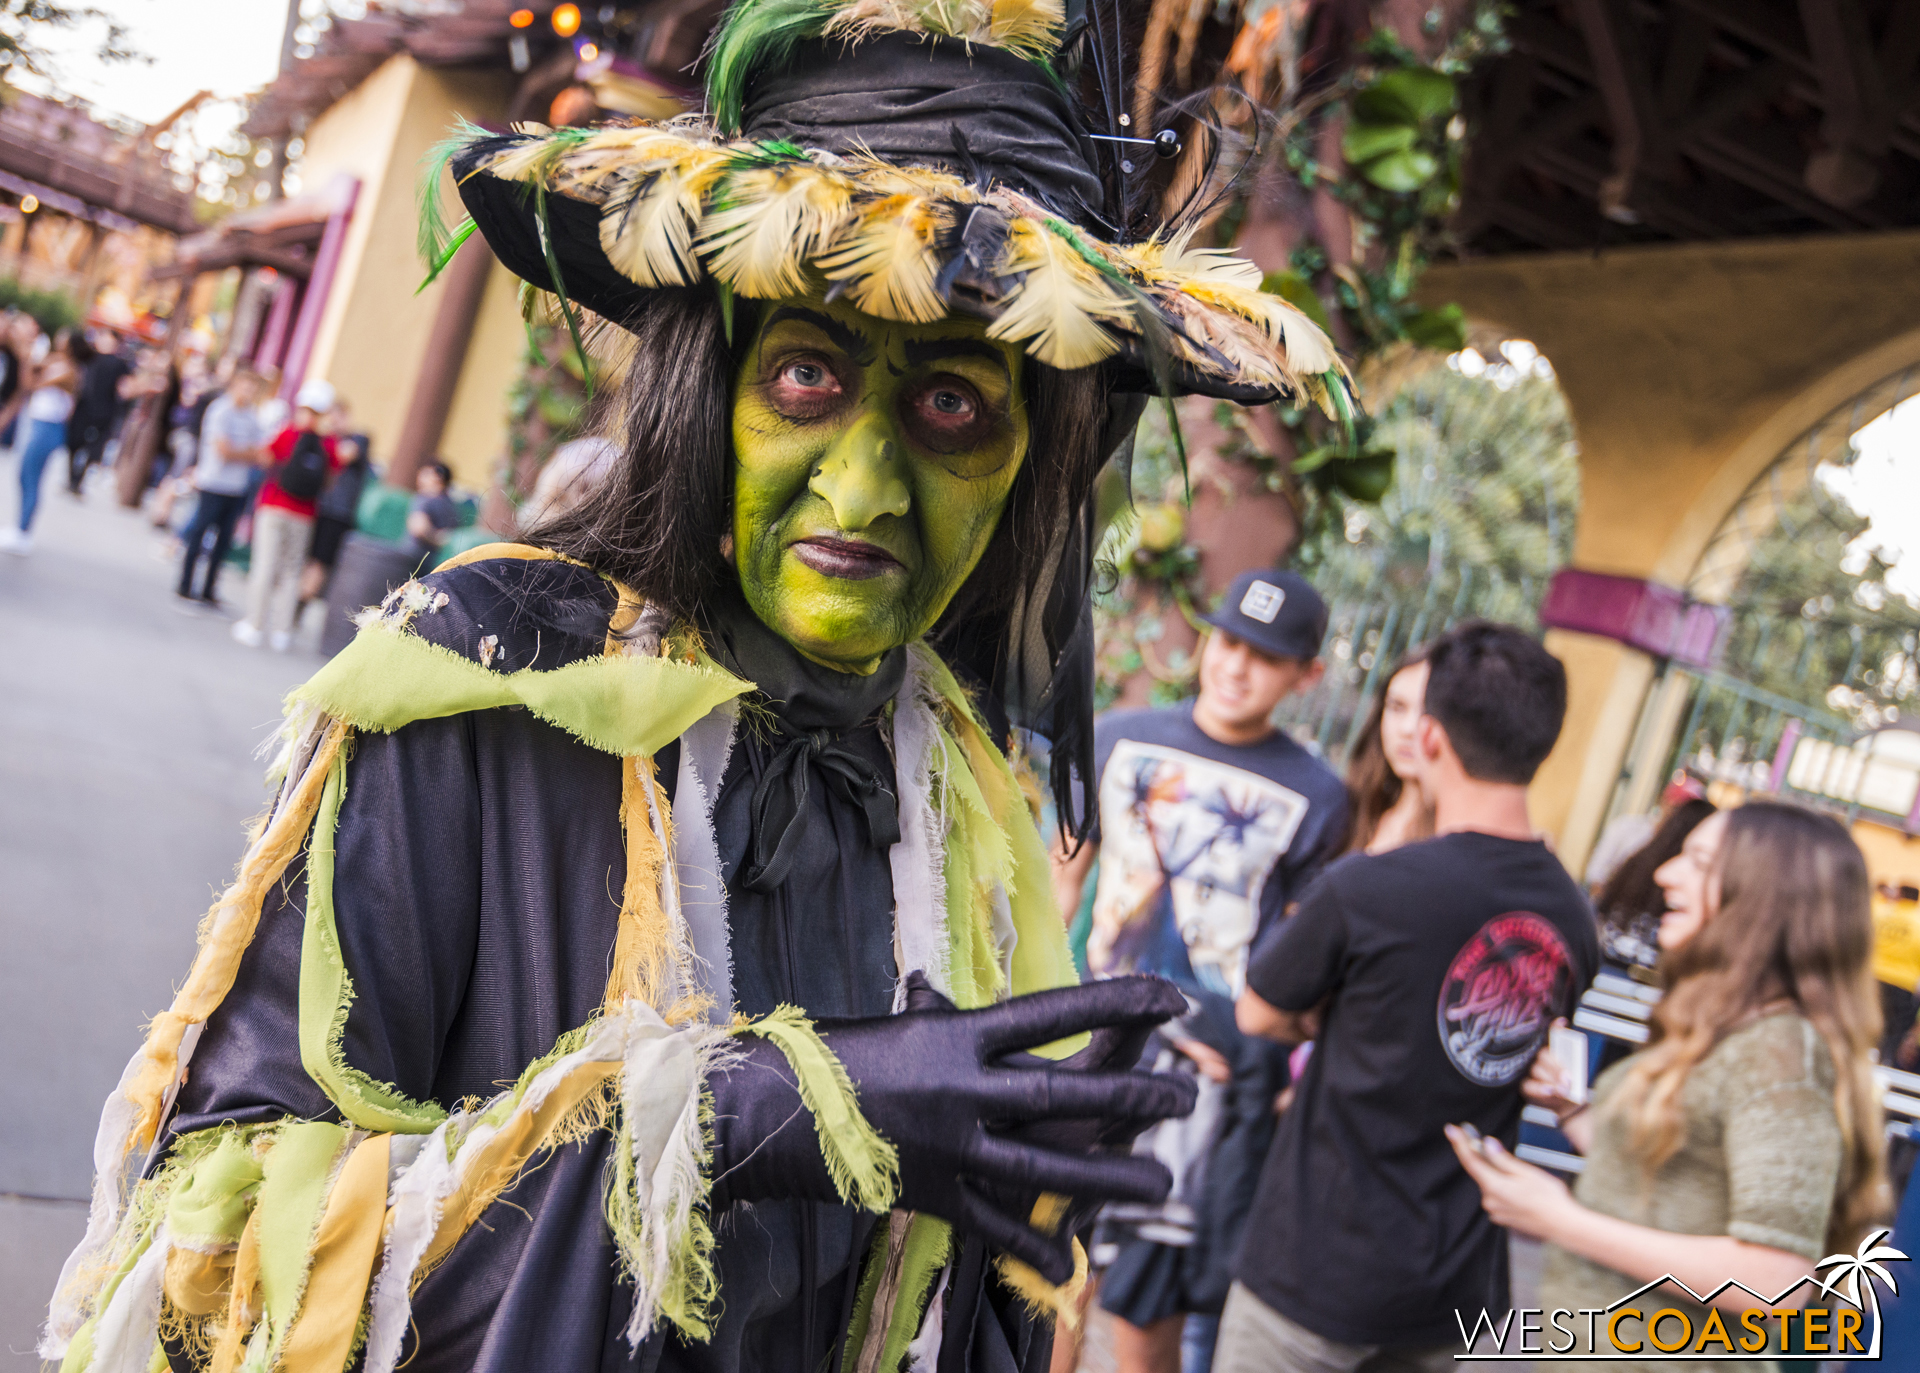  Working her (I think) 35th year at Haunt, Charlene Parker, the original Green Witch (well, original in that it's different from the talking Scary Farm icon Green Witch). 